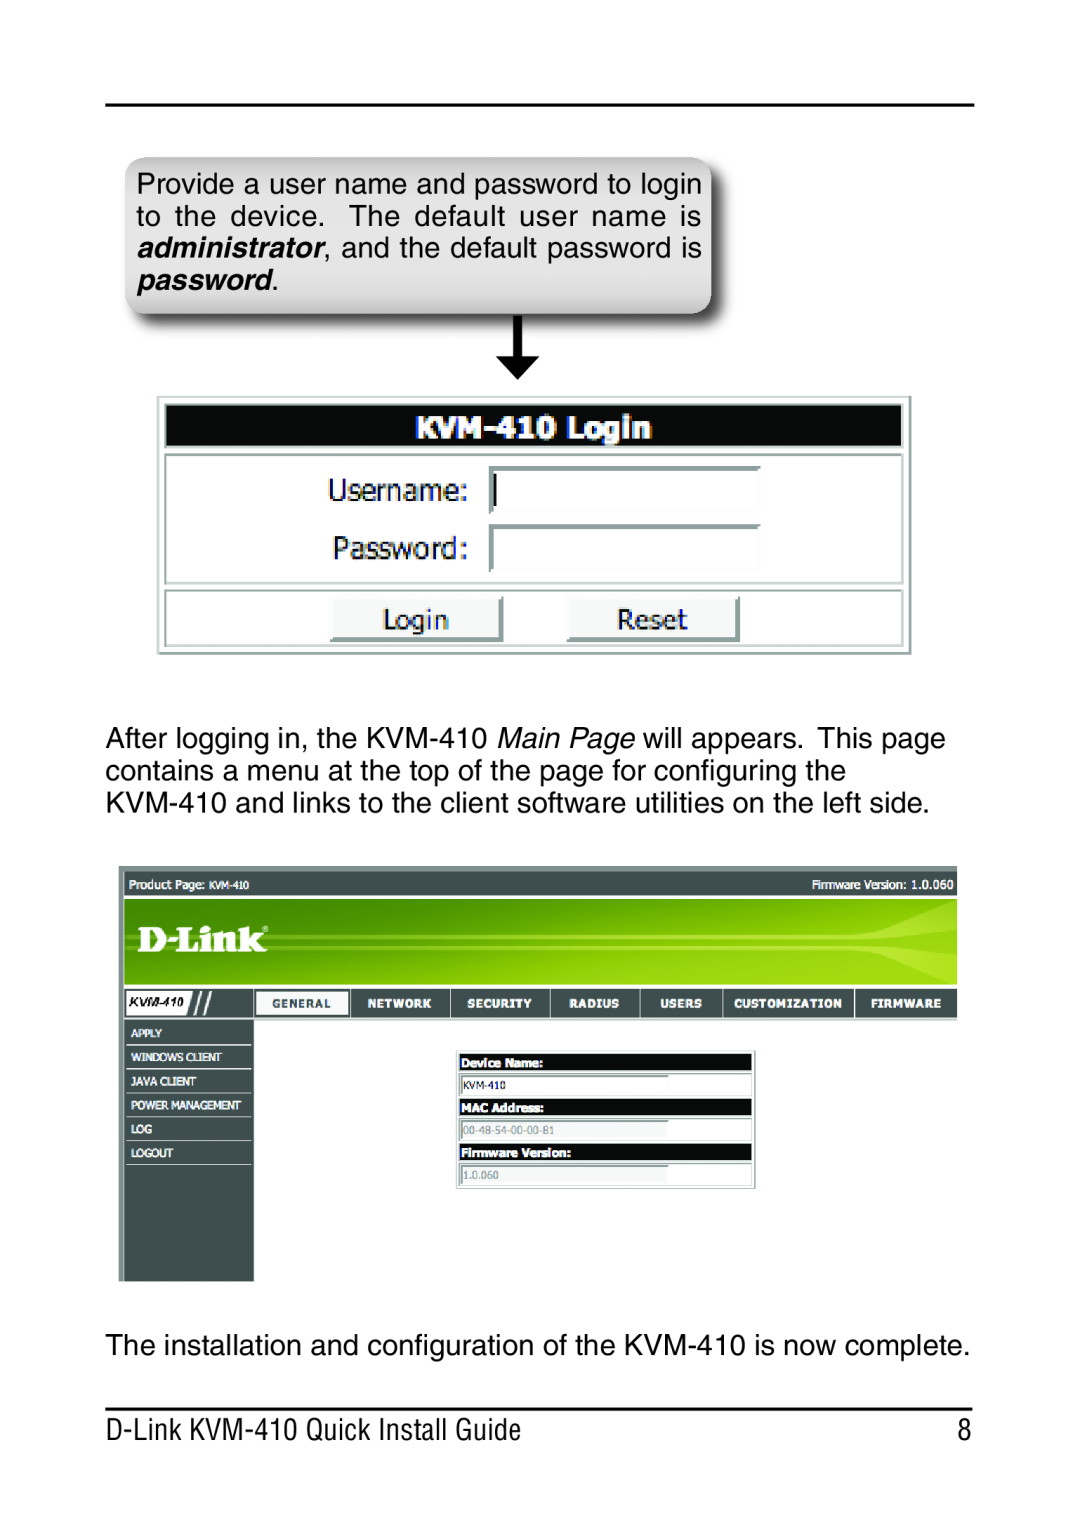 D-Link manual The installation and configuration of the KVM-410 is now complete, D-Link KVM-410 Quick Install Guide 